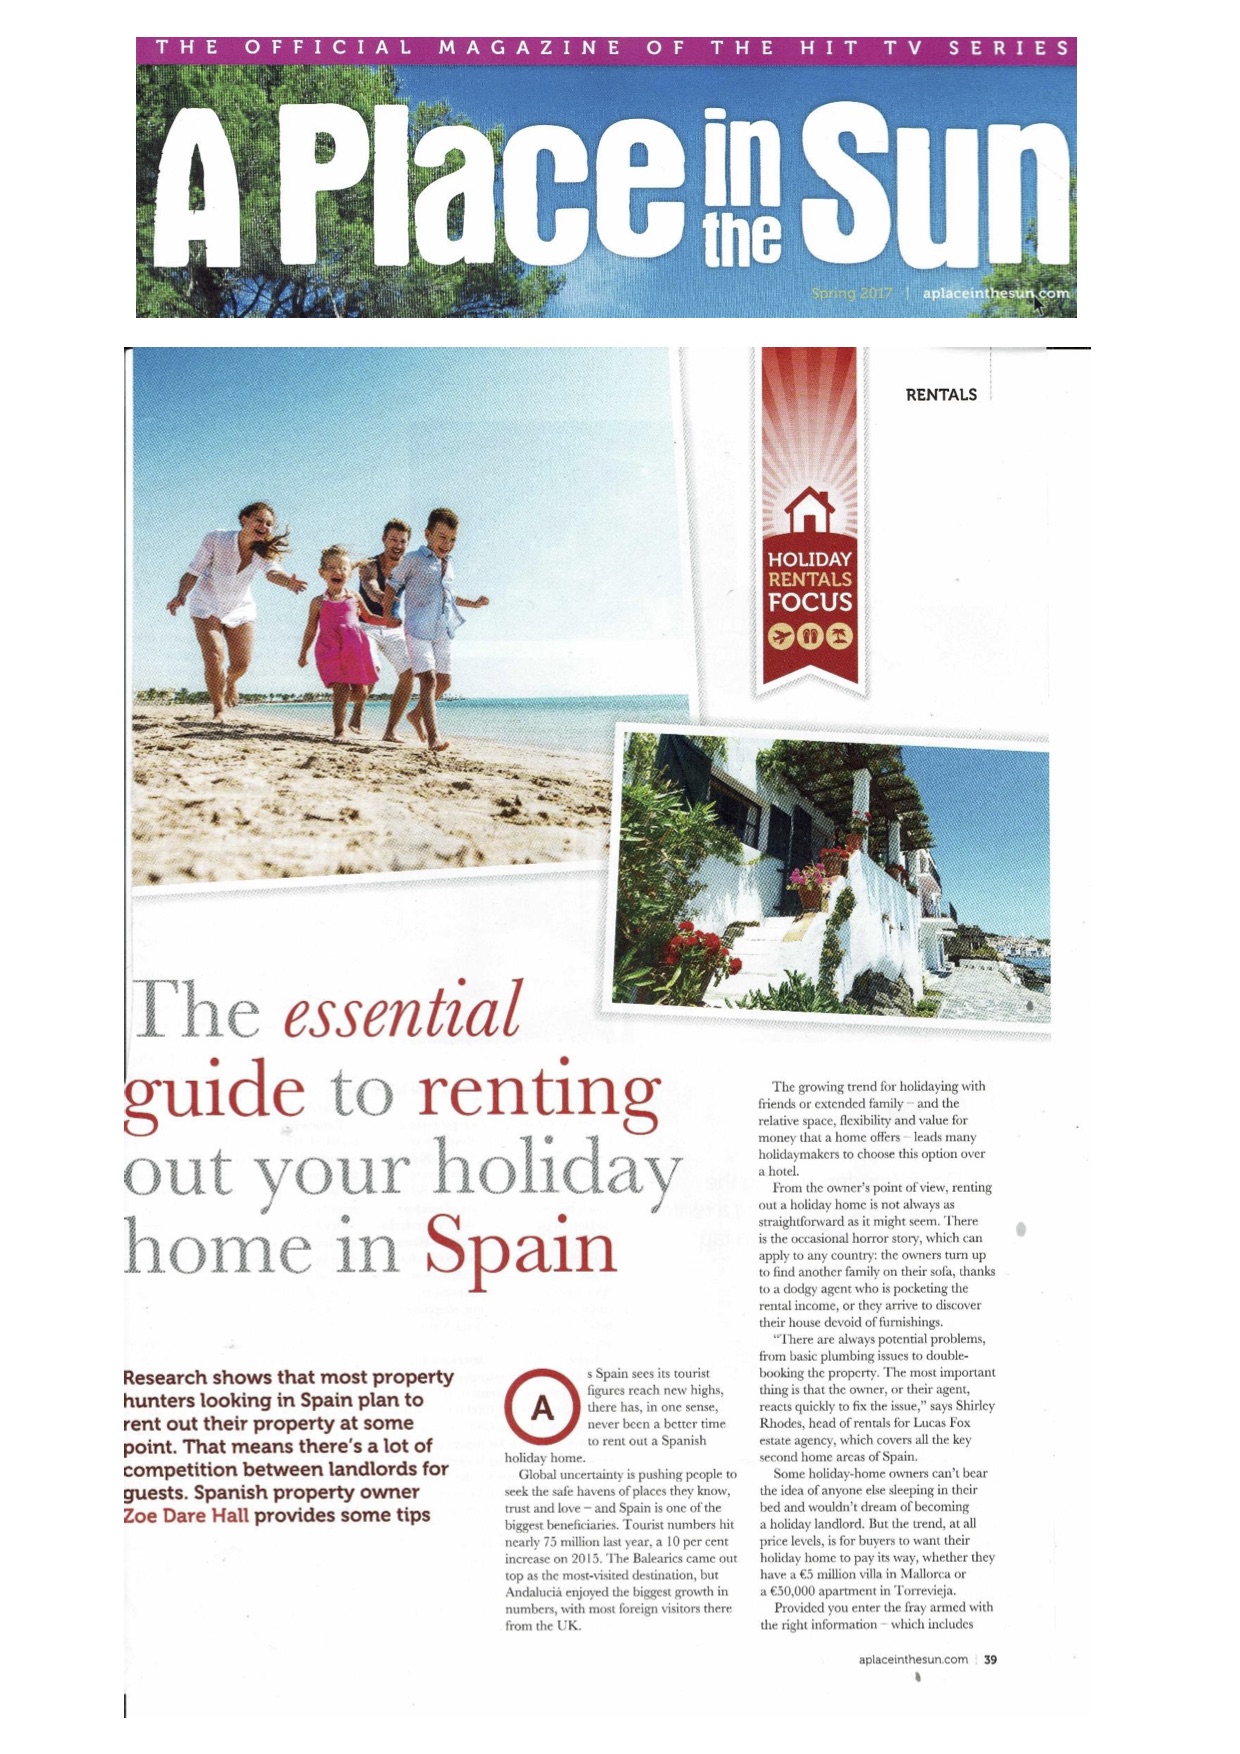 A Place in the Sun – Renting out your Spanish holiday home